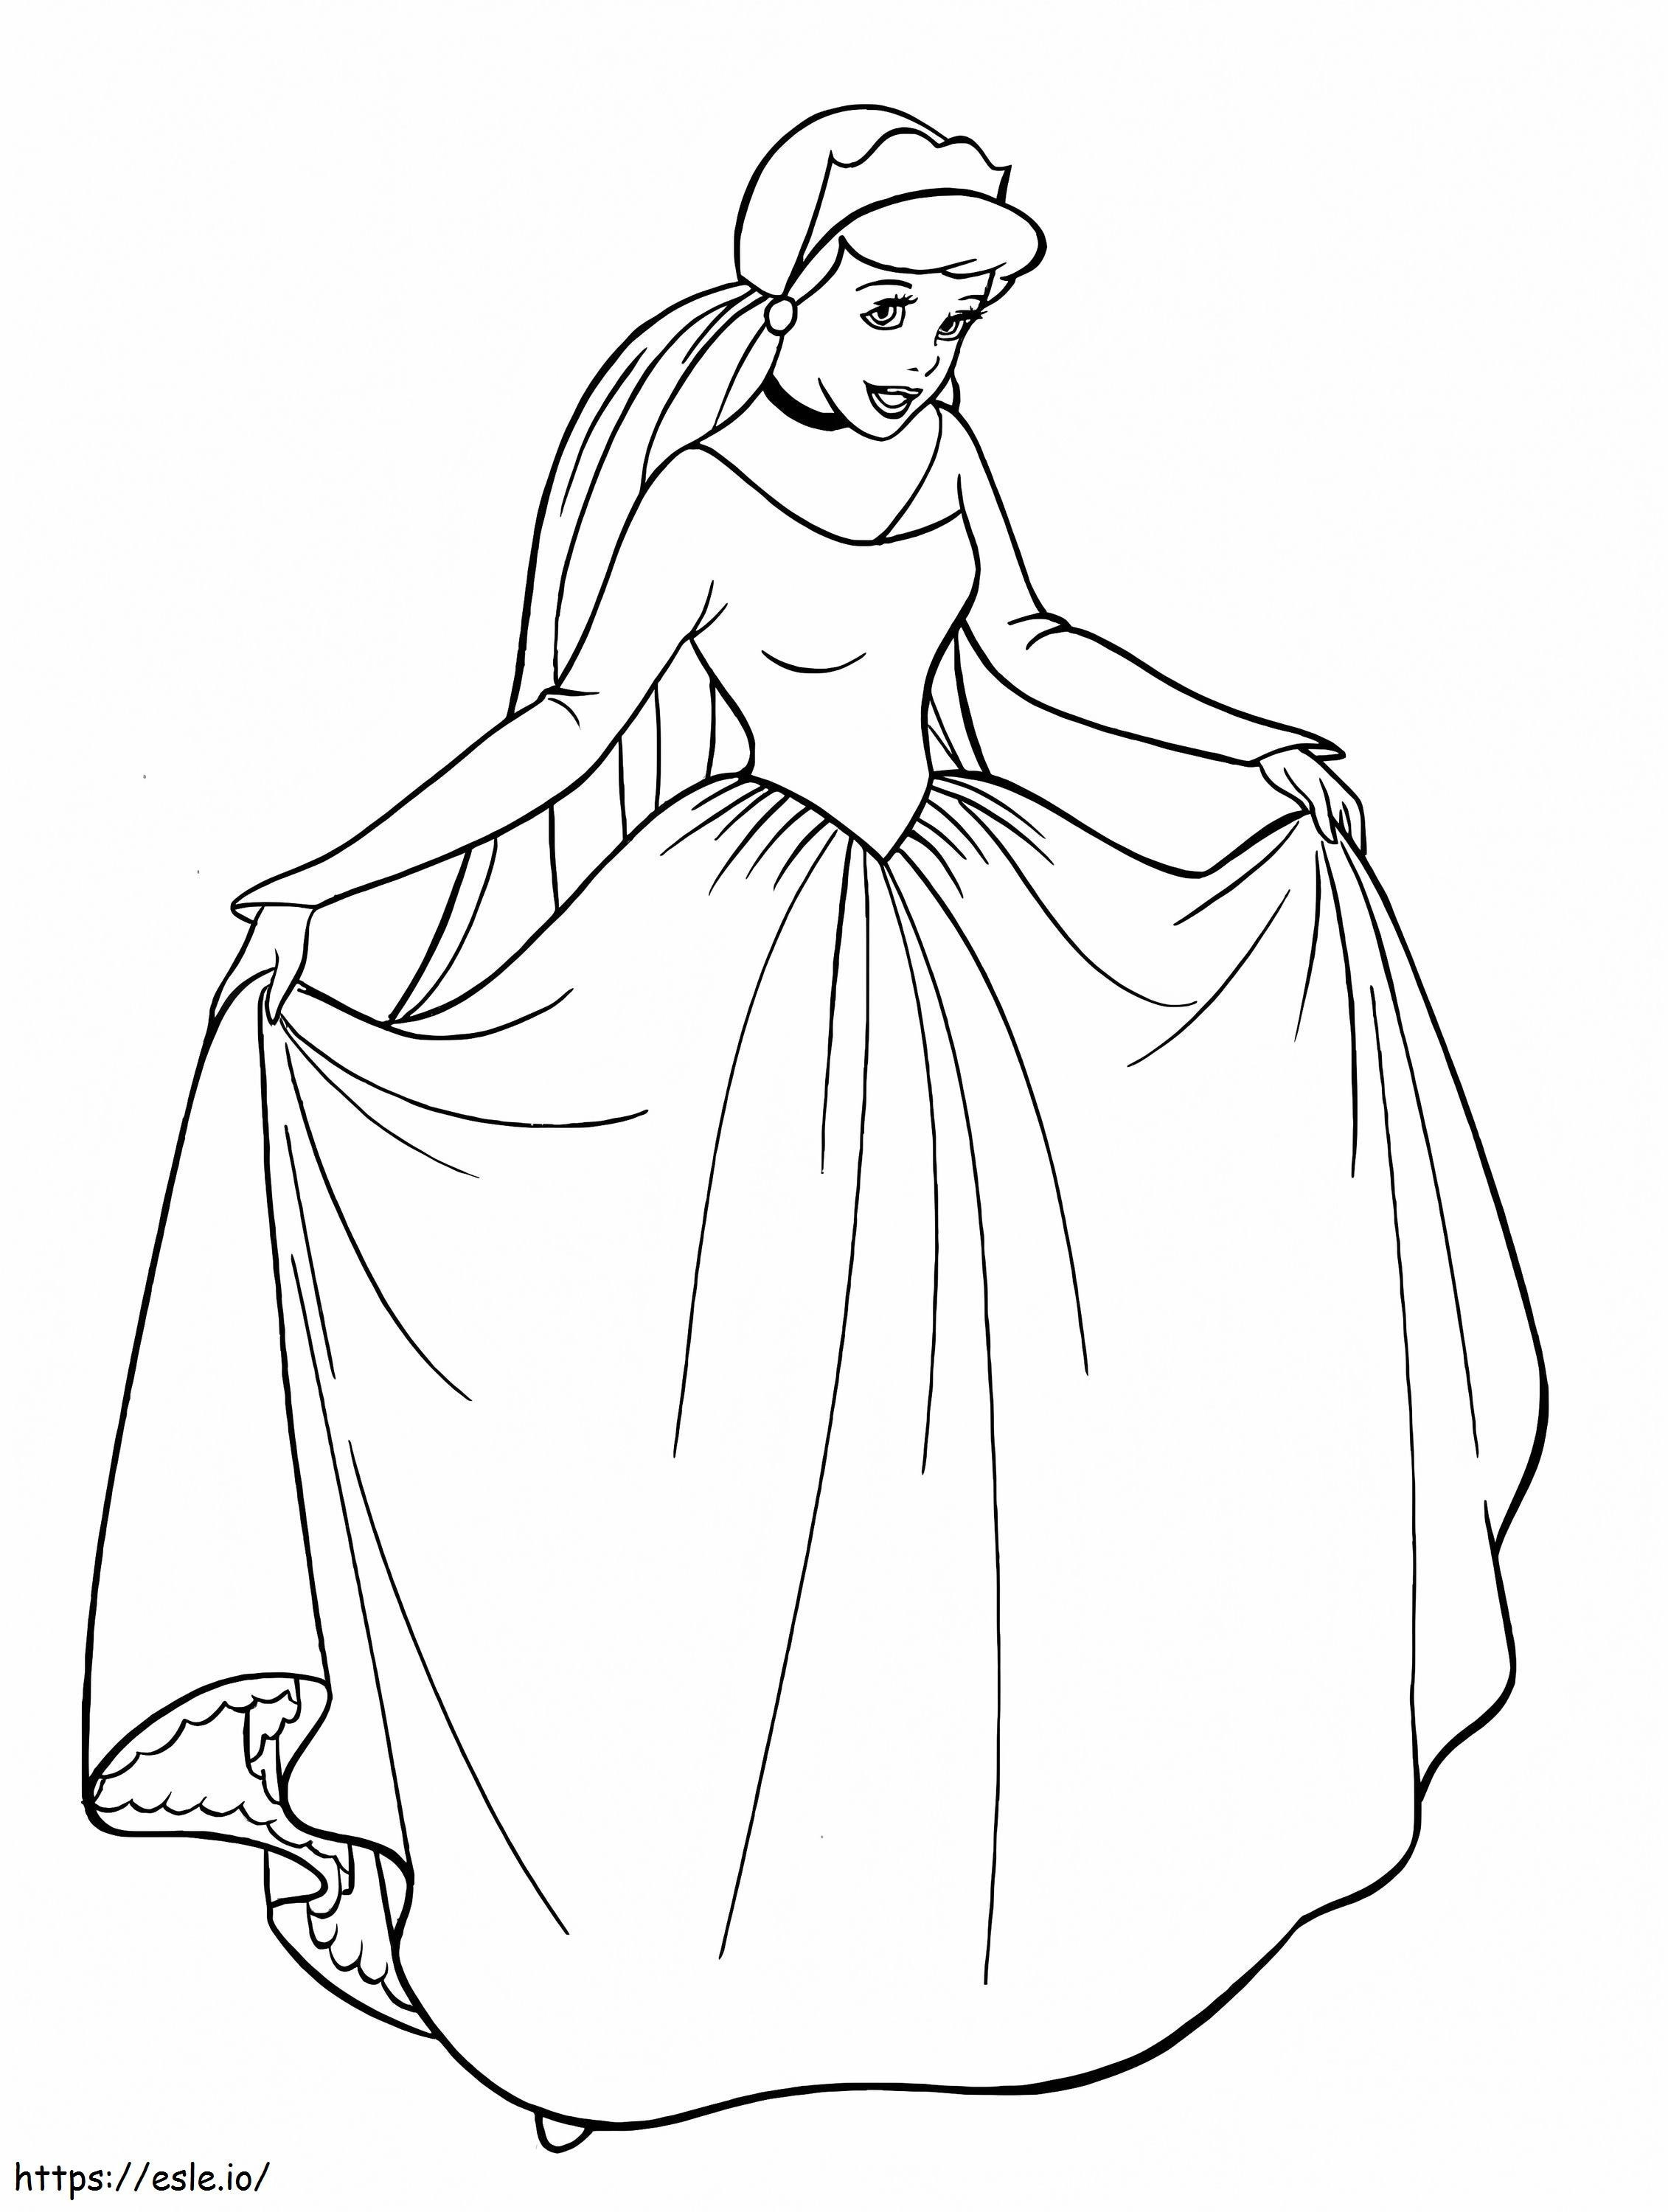 Lovely Cinderella coloring page